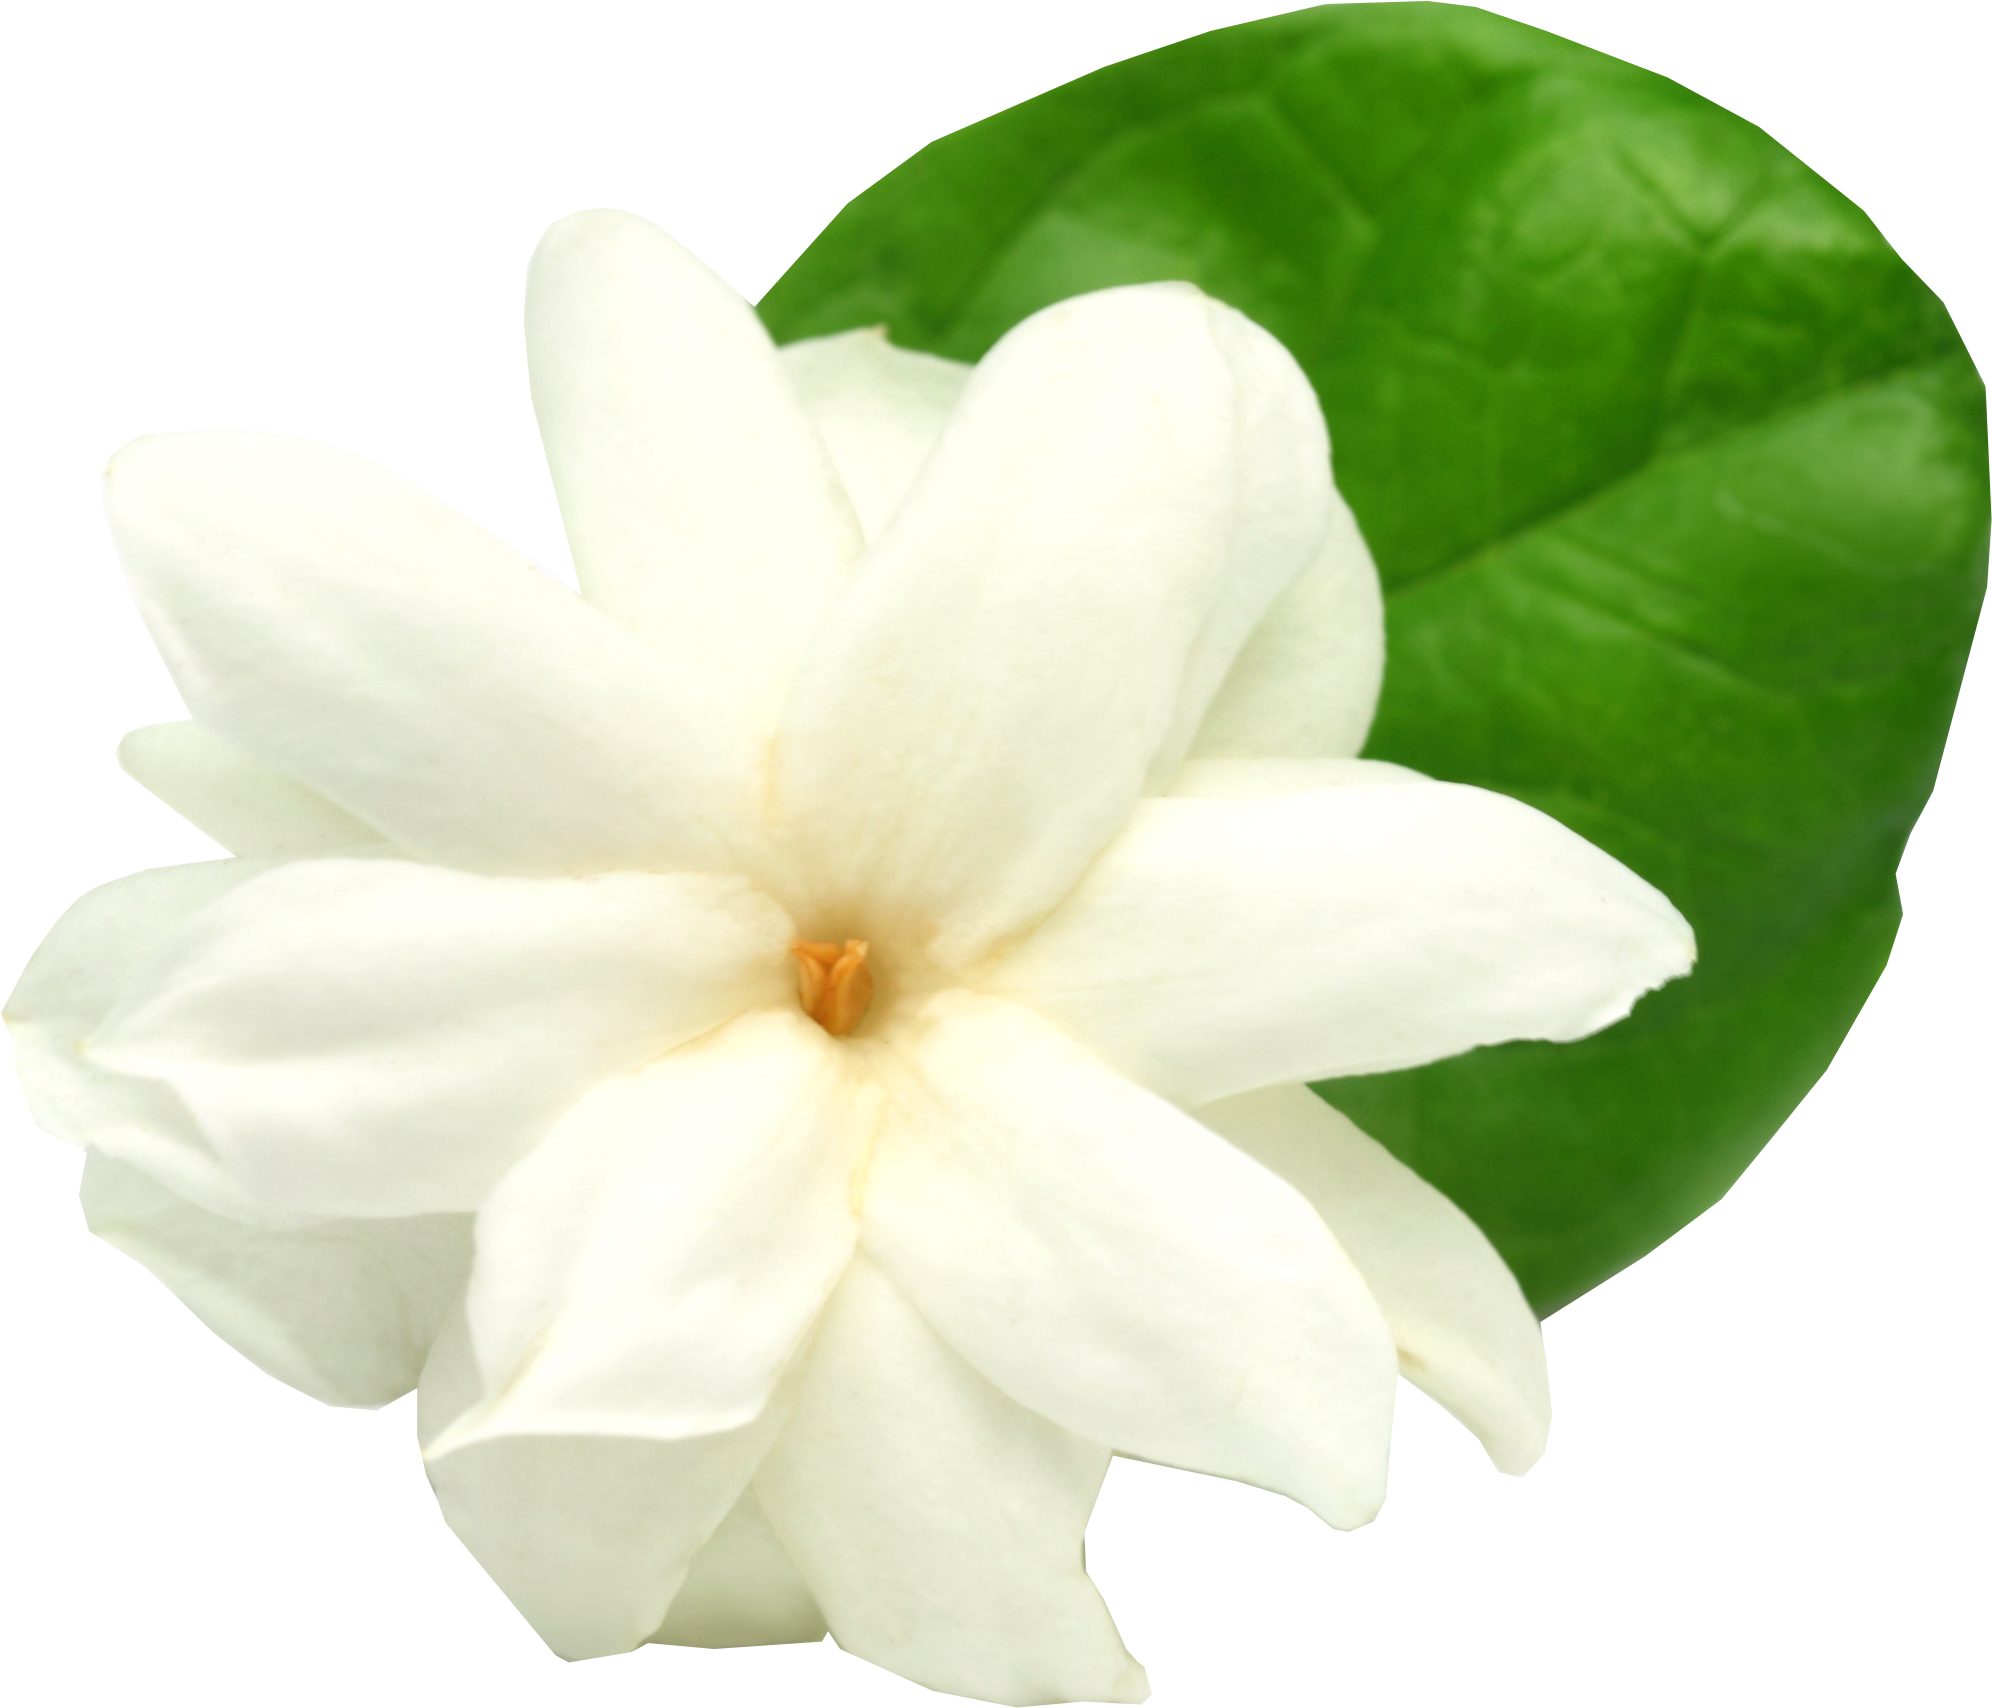 A White Flower With A Green Leaf